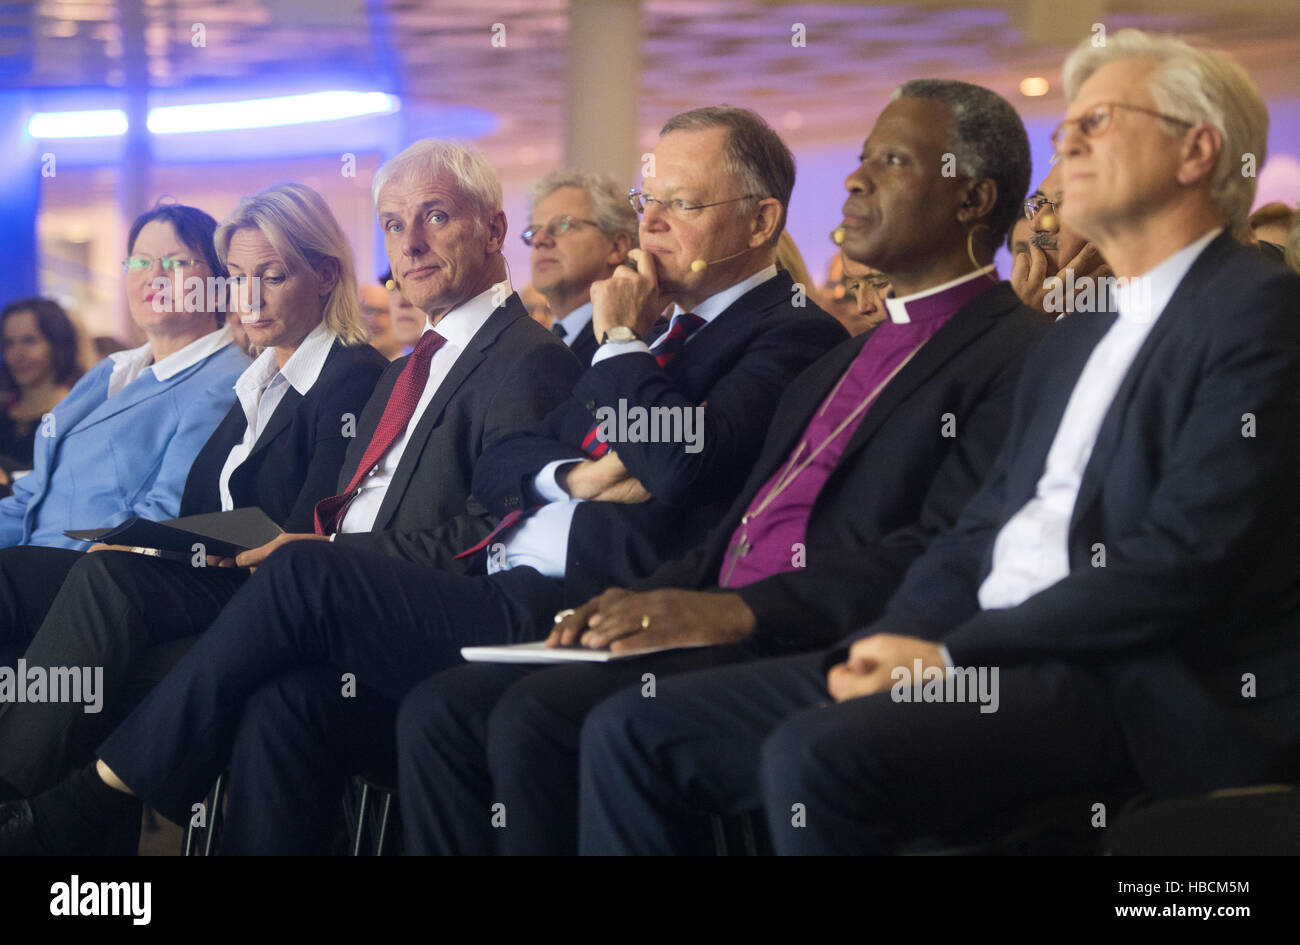 Matthias Mueller (3-L), Chairman of Volkswagen AG, his wife Barbara Rittner (2-L), The Premier of Lower Saxony Stefan Weil (C), the archbishop of Cape Town Thabo Makgoba (2-R), and Heinrich Bedford-Strohm, Chairman of the Council of the Evangelical Church of Germany (EKD) at a discussion forum sponsored by the Evangelical Church of Hanover in the car-manufacturing city of Wolfsburg. Germany, 06 December 2016. Representatives from the fields of politics, economy and religious convened to discuss the topics of work and vocation under the title 'Co-Creator Human: Rediscovering Work'. Photo: Julia Stock Photo